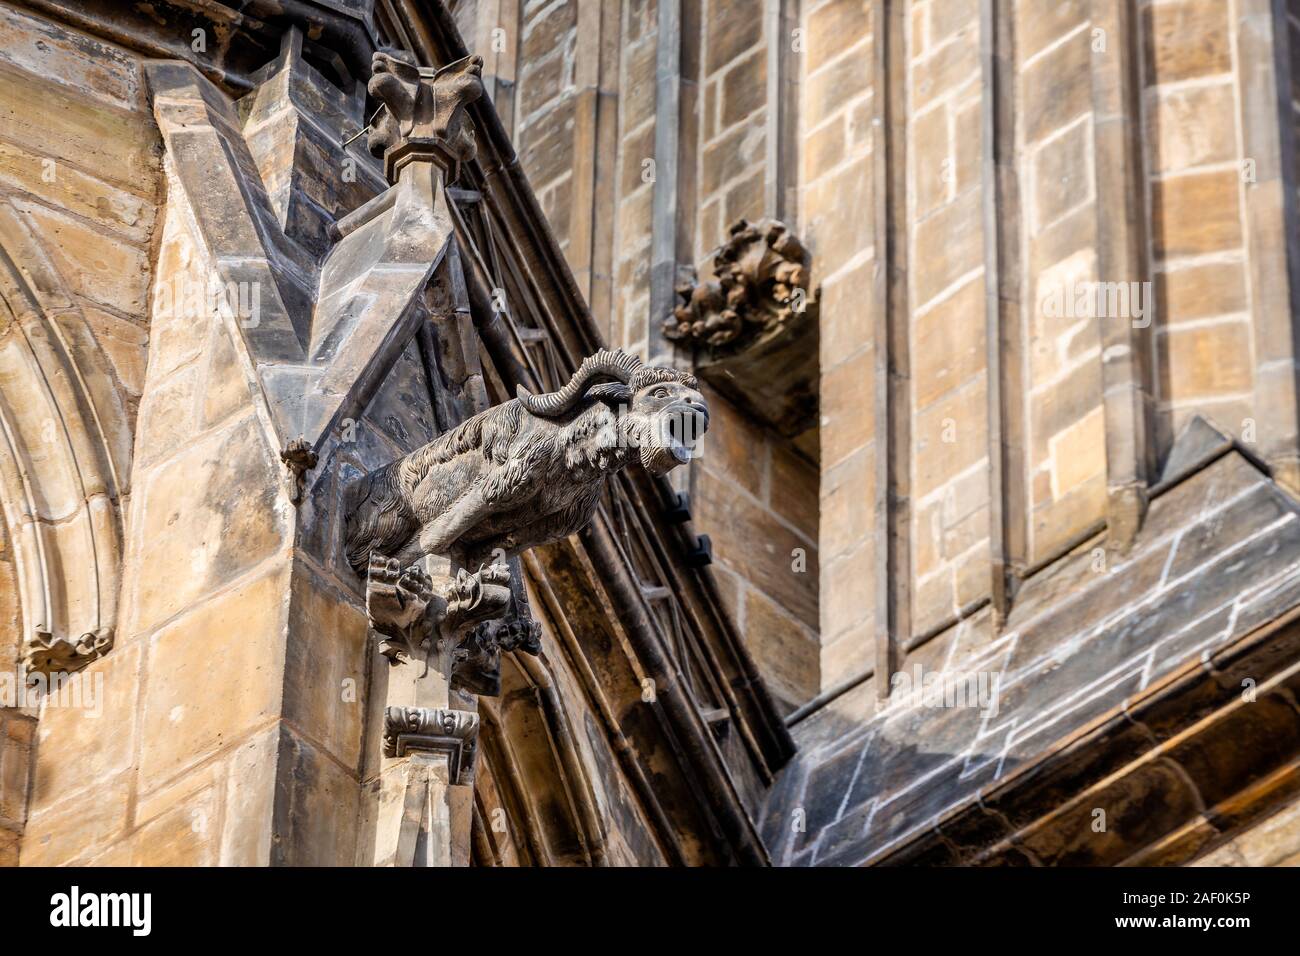 One of gargoyles of St. Vitus Cathedral (Cathedral of Saints Vitus, Wenceslaus and Adalbert) in Prague, Czech Republic. Stock Photo